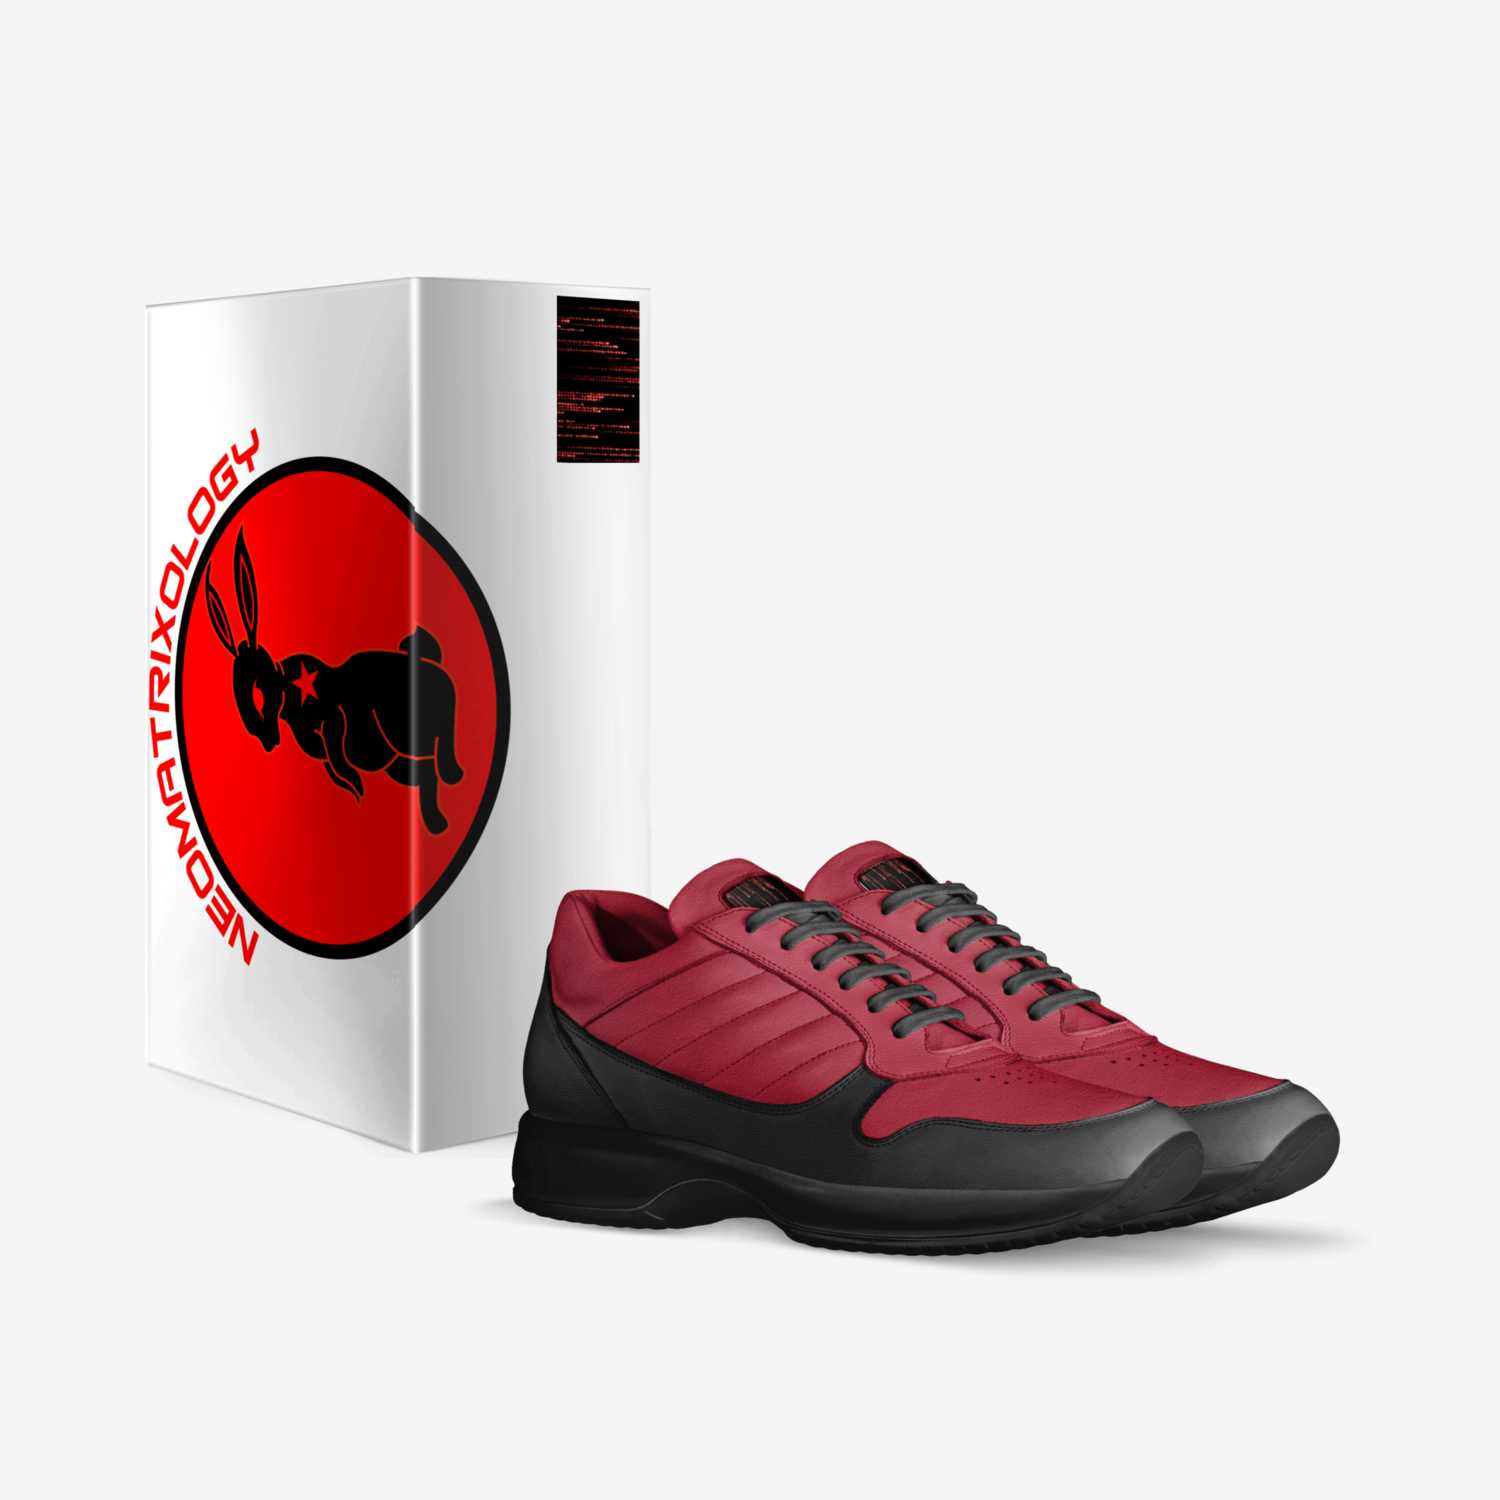 Red Pills custom made in Italy shoes by Lazurus Neomatrixology | Box view